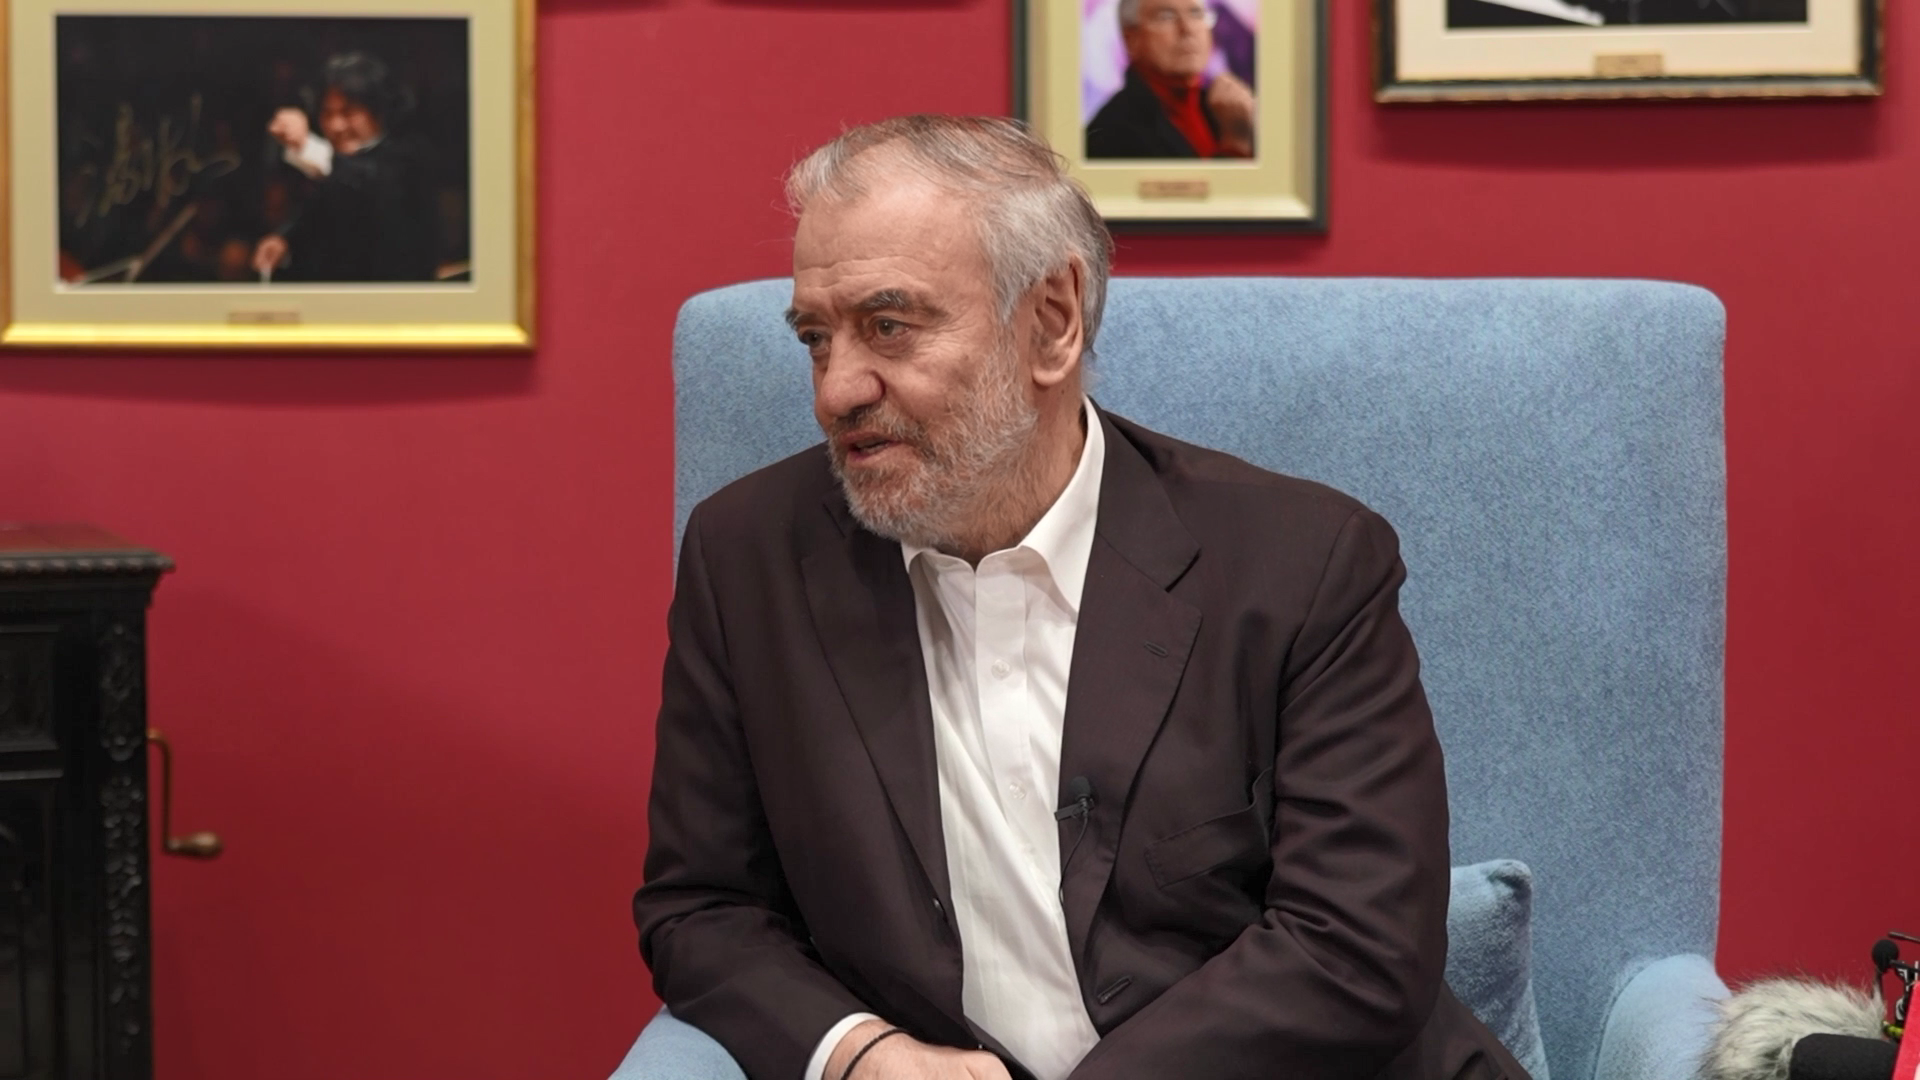 Valery Gergiev gives an interview. /CGTN